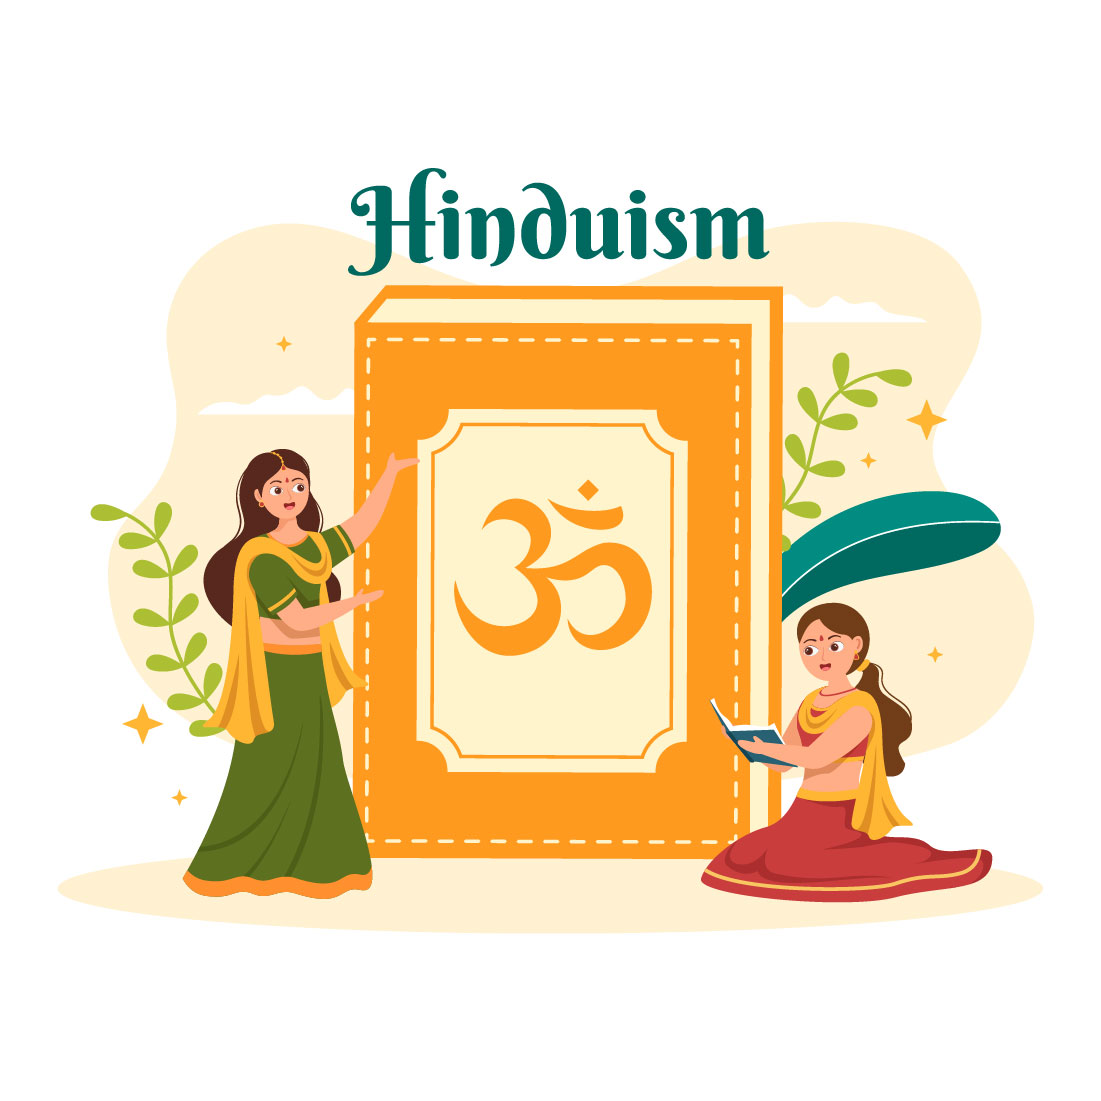 Hinduism of Indian Illustration cover image.